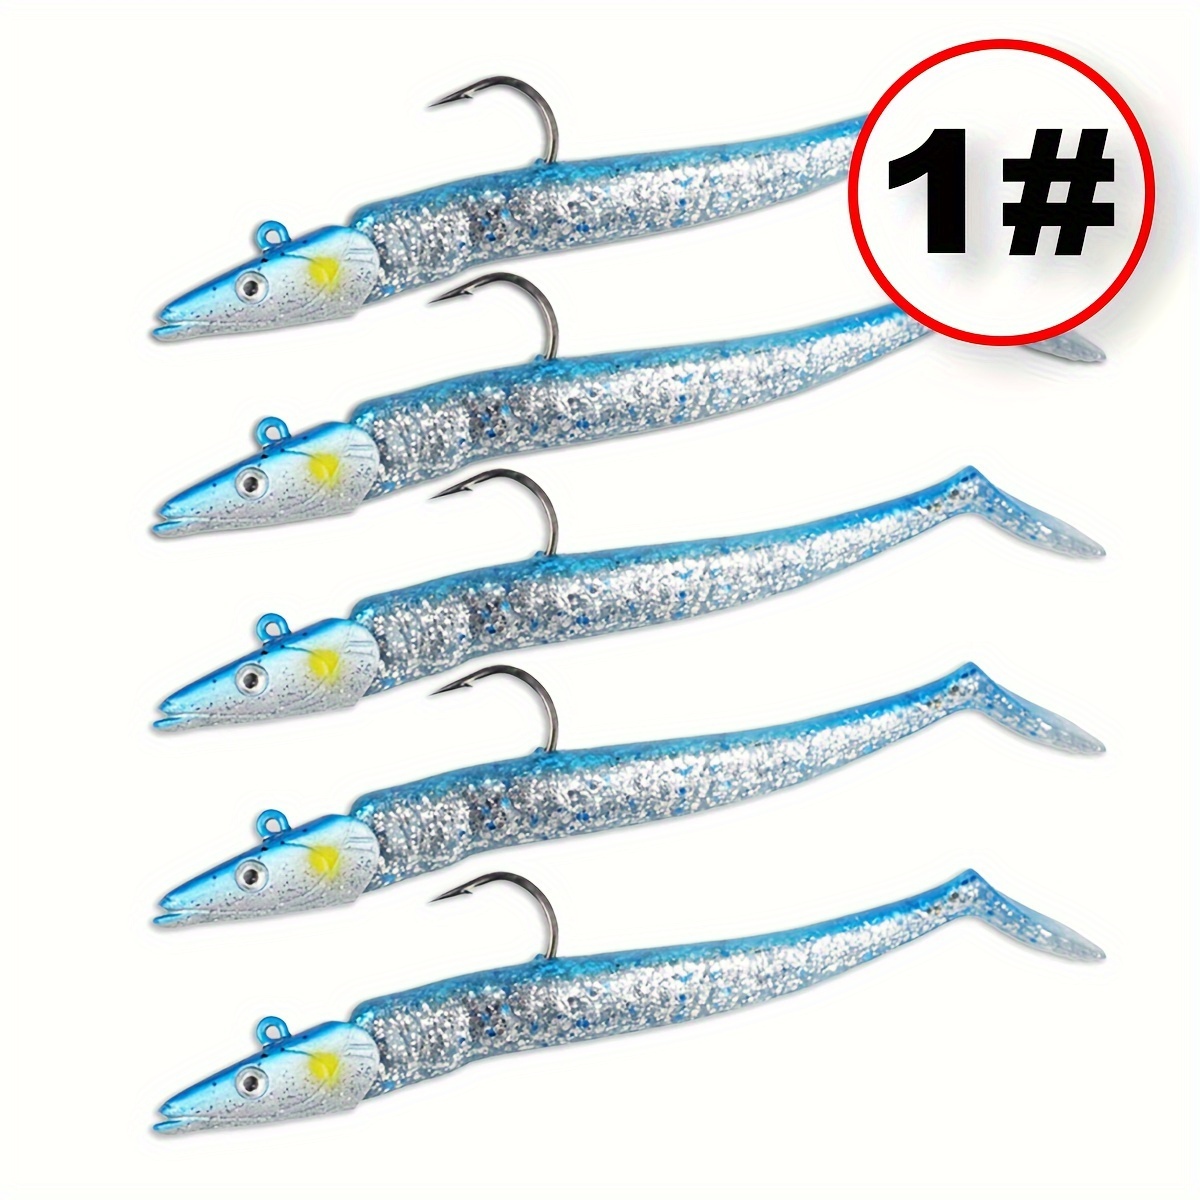 Headhunter Lures, Premium Two Toned Jig Head Kit, 1.32 and 1.16 oz, 65pc 